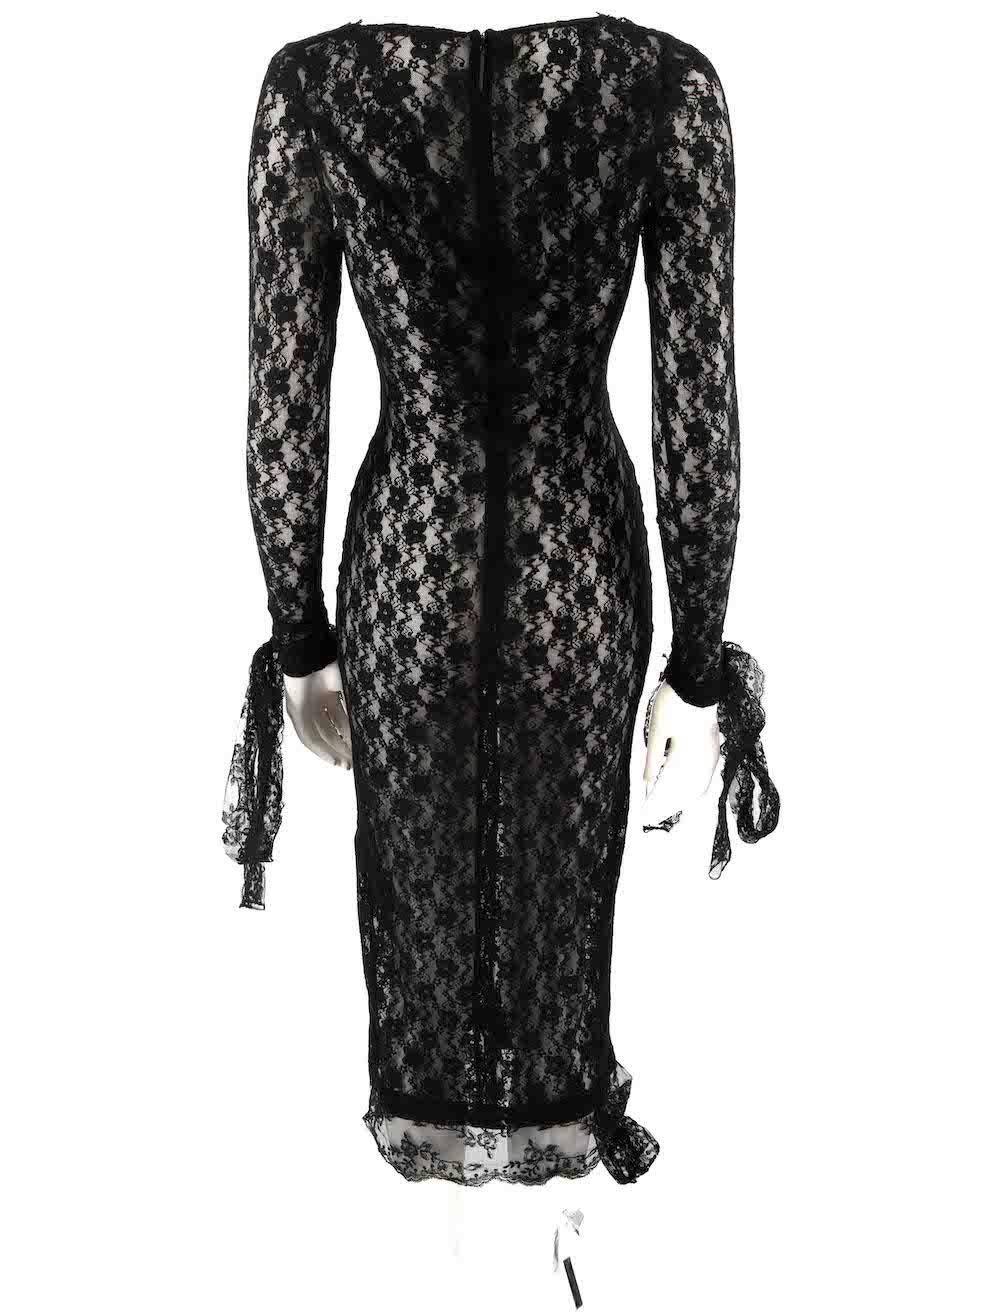 Christopher Kane Black Lace Sheer Midi Dress Size XS In Good Condition For Sale In London, GB